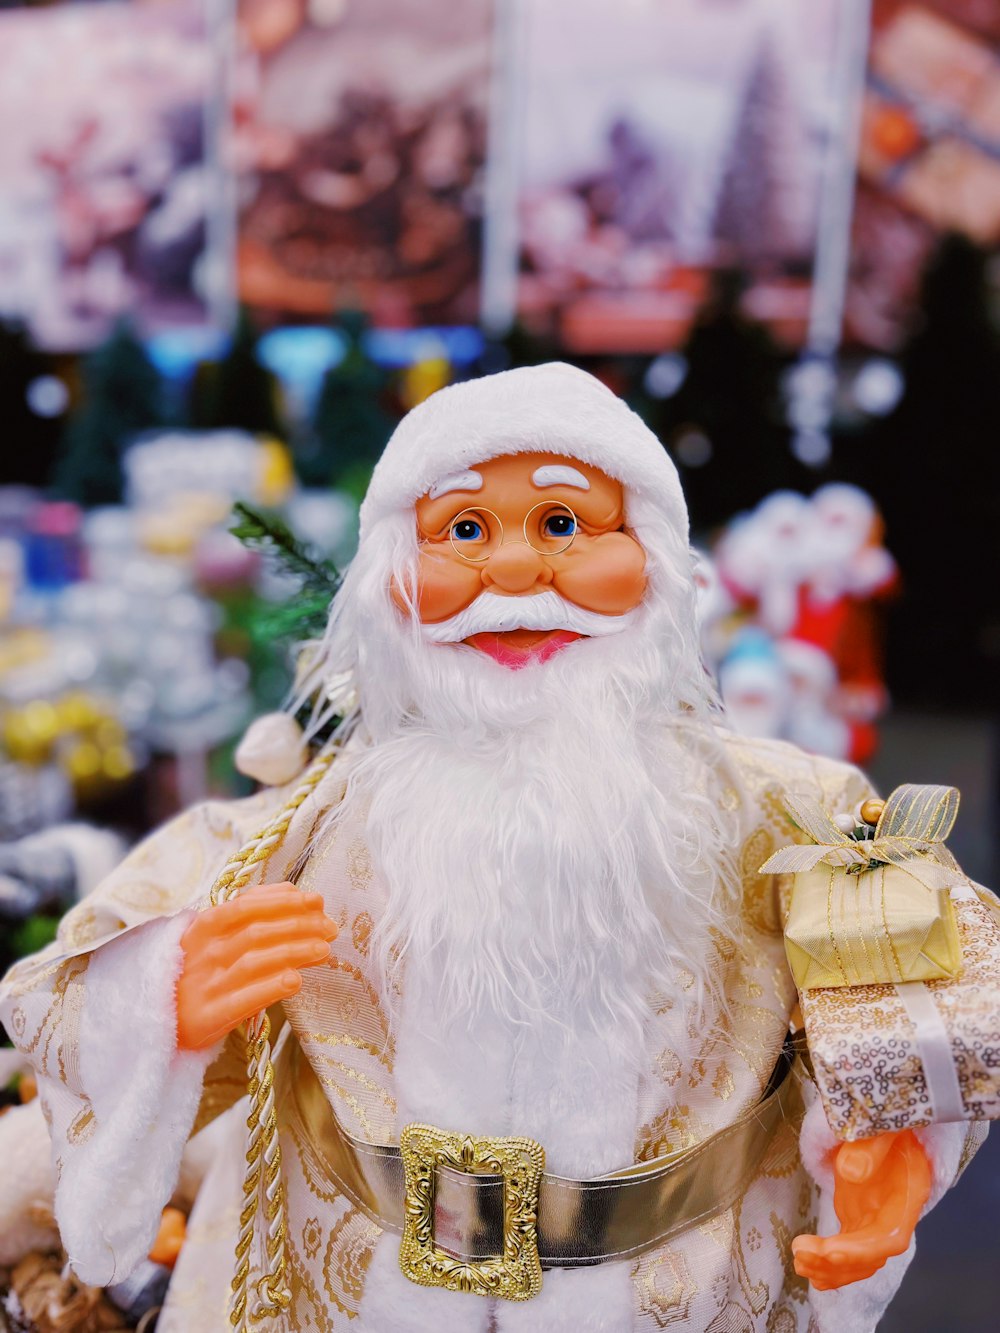 a close up of a figurine of a santa clause